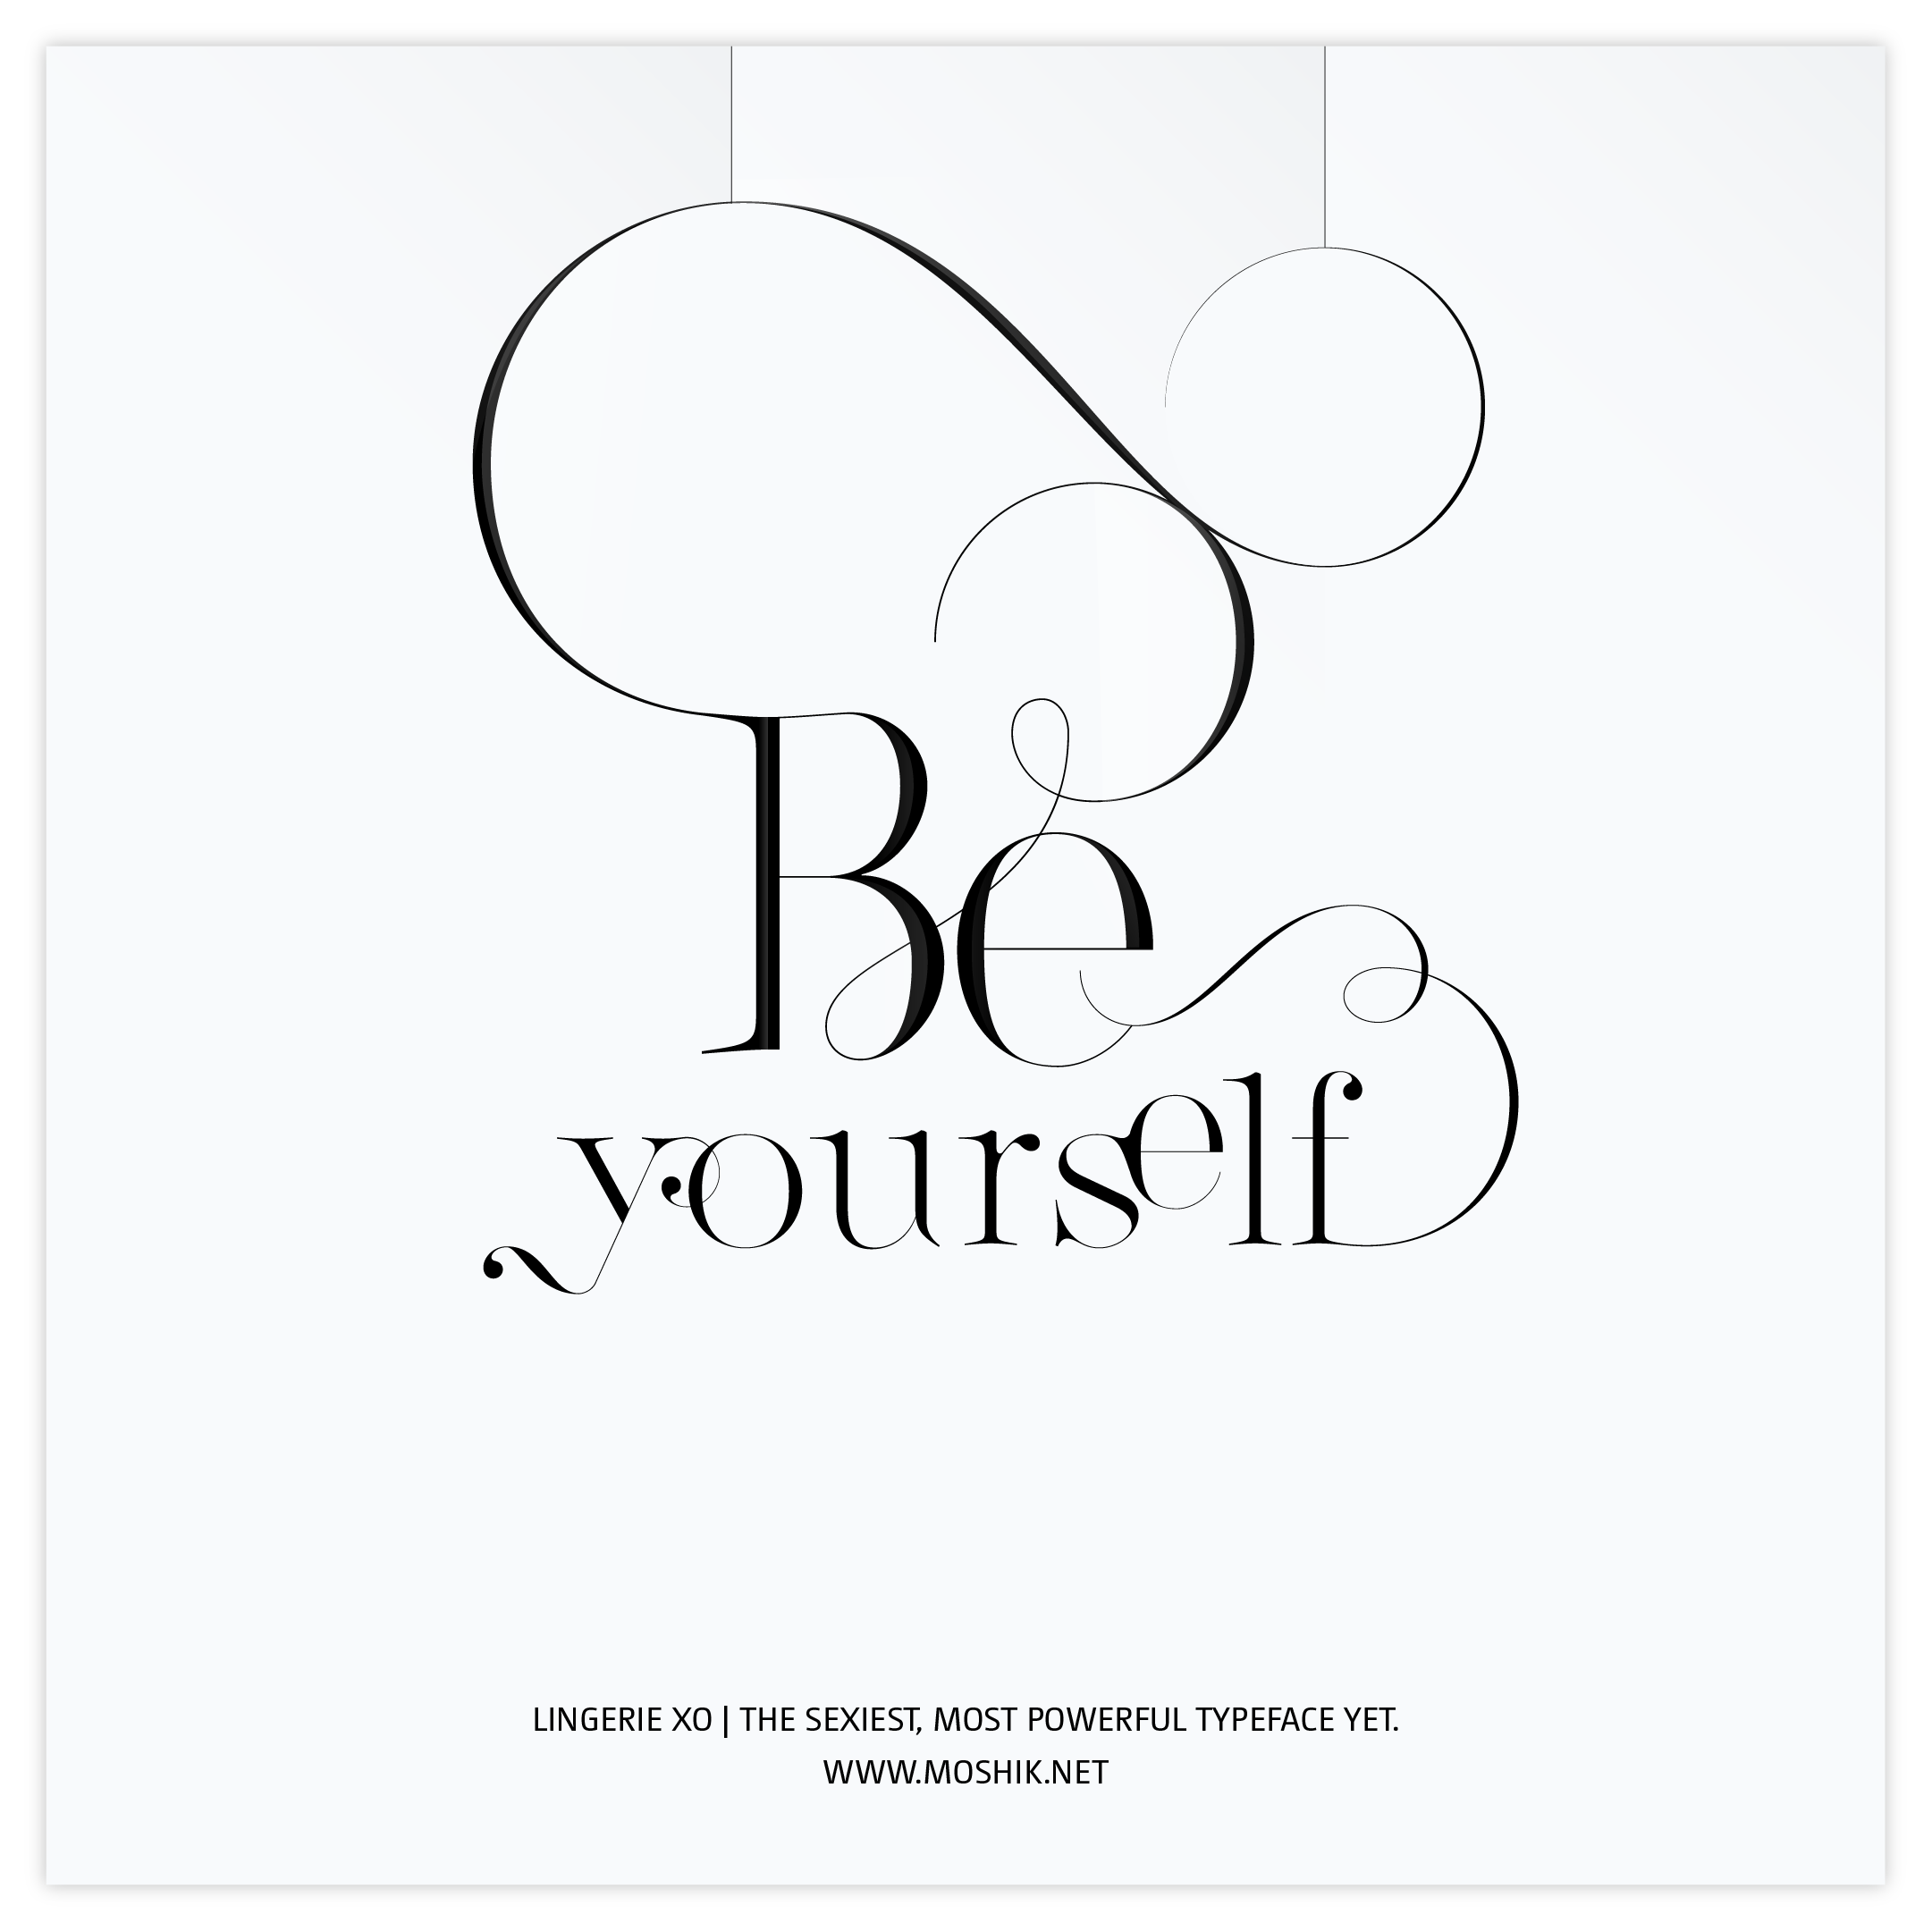 Be yourself, Lingerie XO Typeface, fashion fonts, fashion typography, vogue fonts, must have fonts for fashion, best fonts 2022, must have fonts 2022, Fashion logos, vogue fonts, fashion magazine fonts, sexy logos, sexy fashion logo, fashion ligatures